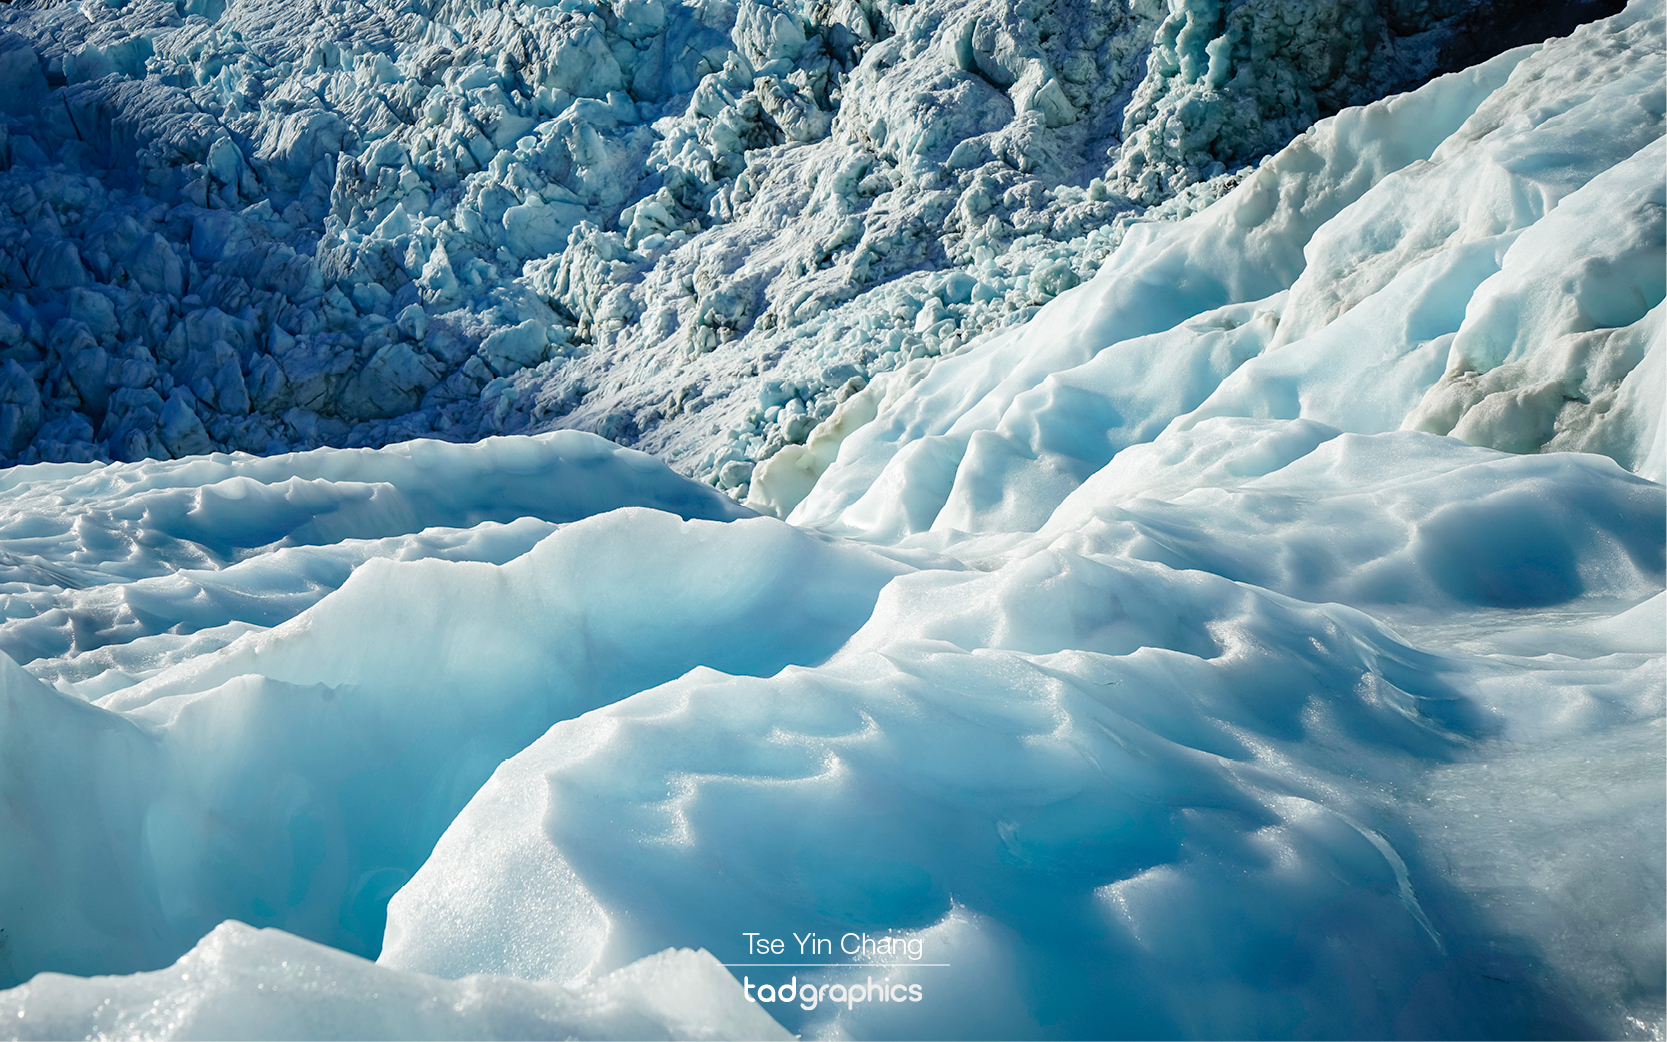 Franz Josef Glacier, South Island, New Zealand, photographed in winter 2017